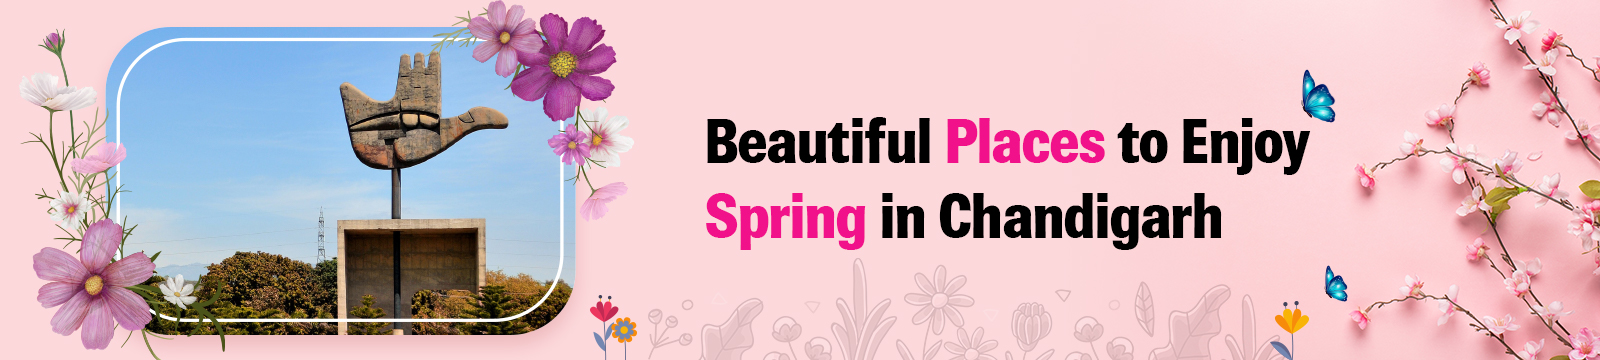 8 Beautiful Places to Enjoy Spring in Chandigarh